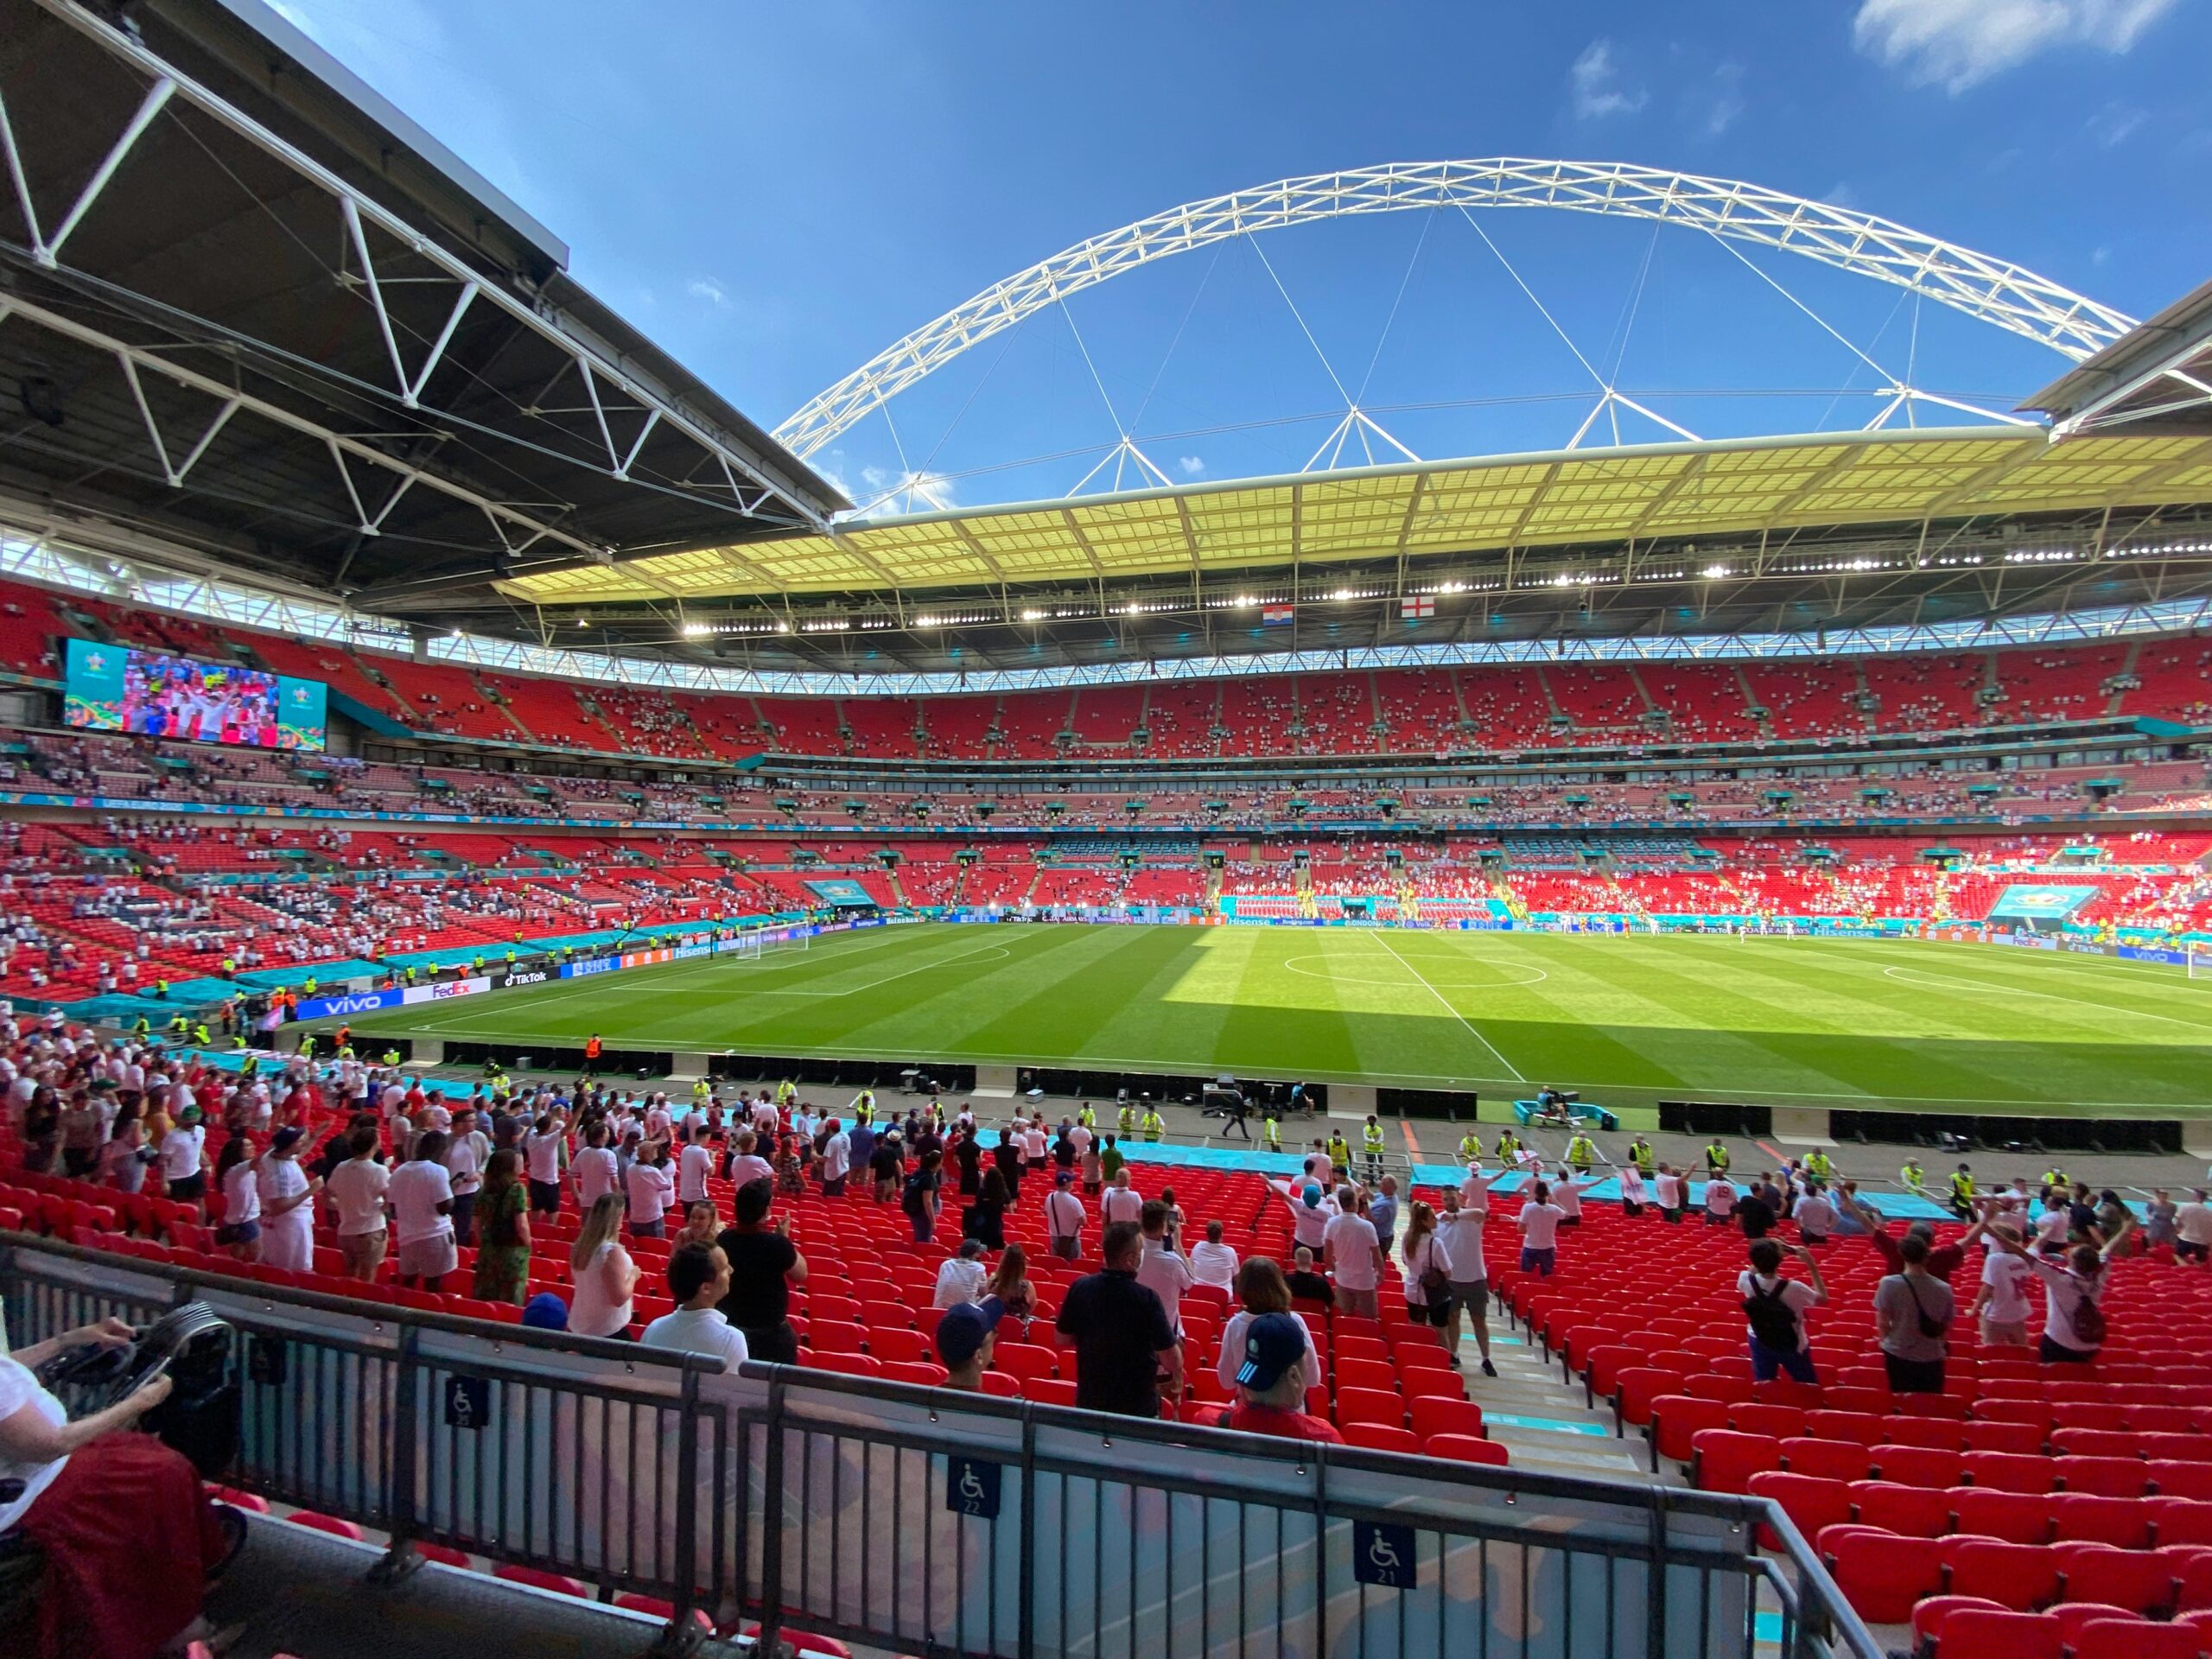 The Definitive Guide To The UEFA Champions League Final At Wembley – Where To Store Your Luggage